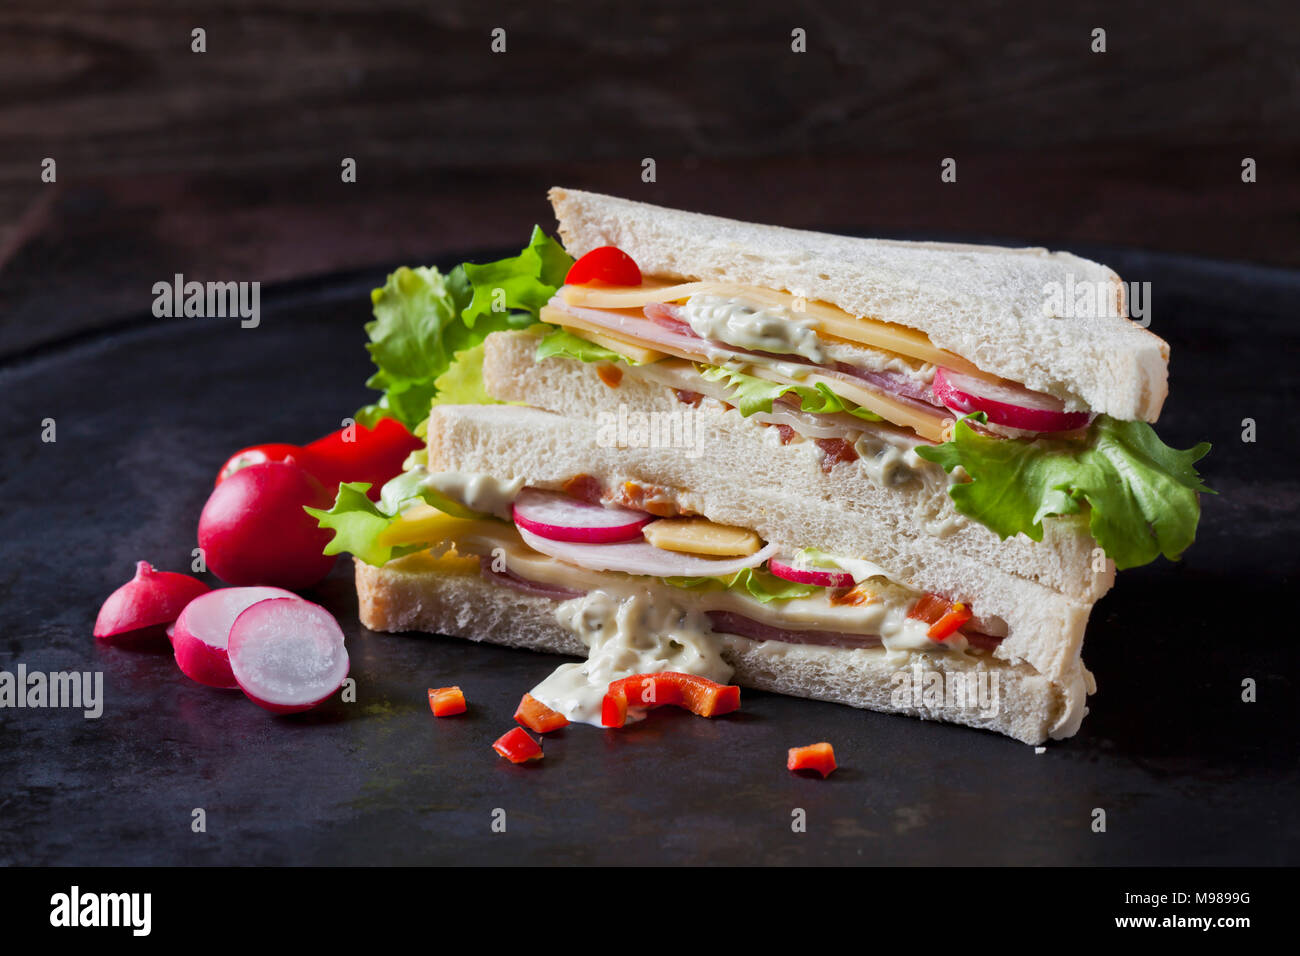 Sandwich with ham and cheese Stock Photo